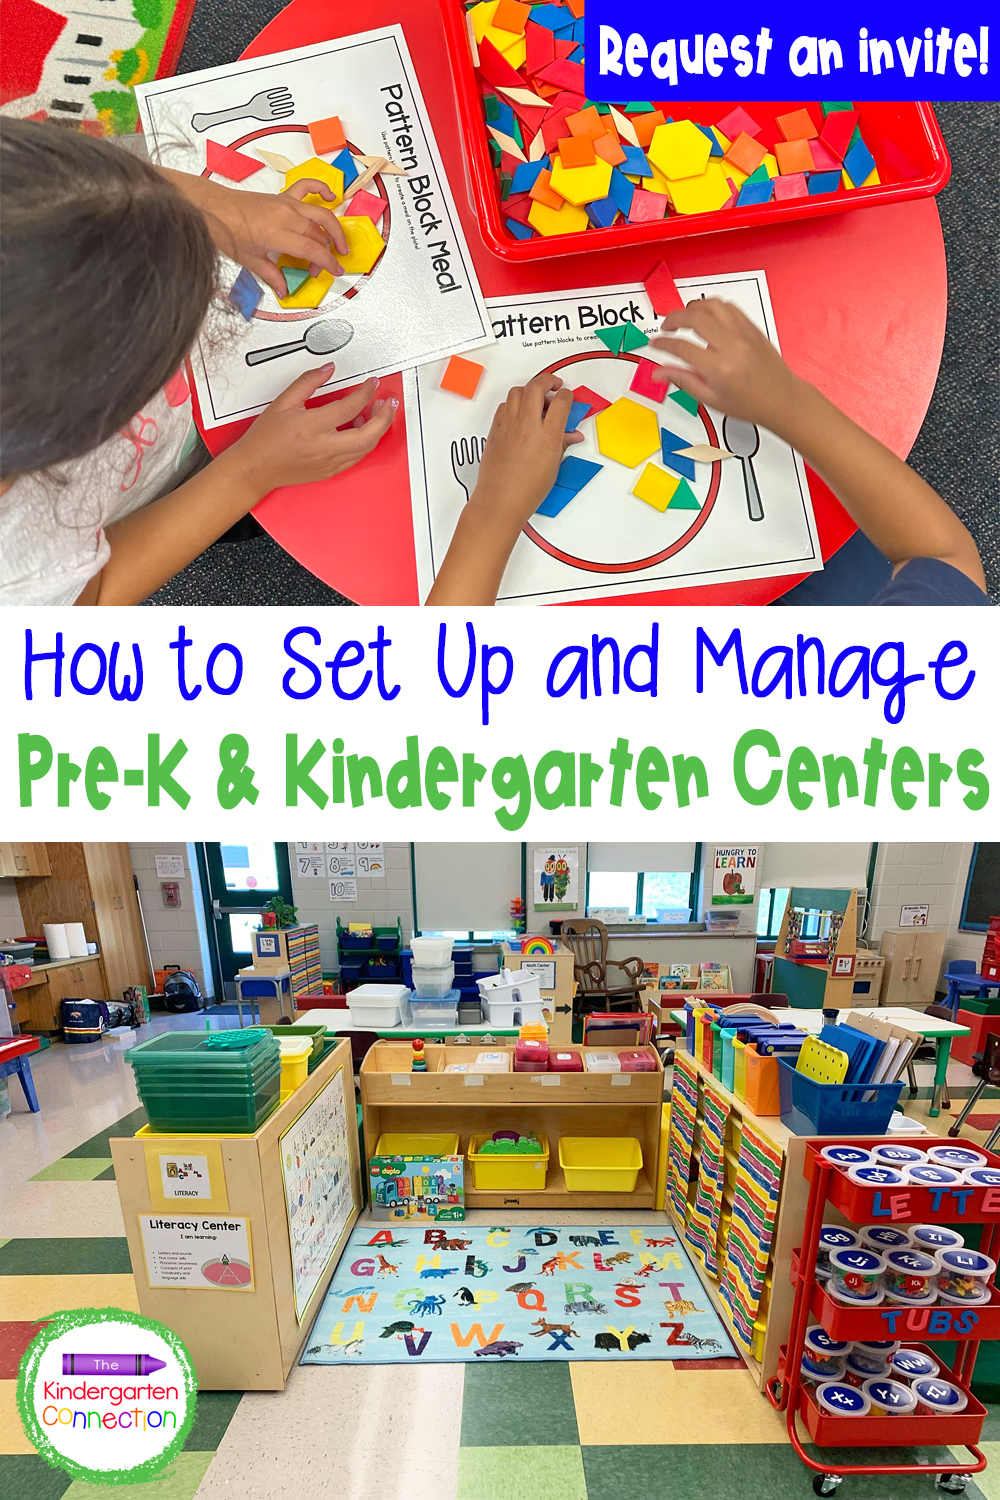 Request an invite to our “Supercharge Your Centers” course to learn how to implement independent and engaging Pre-K & Kindergarten centers!